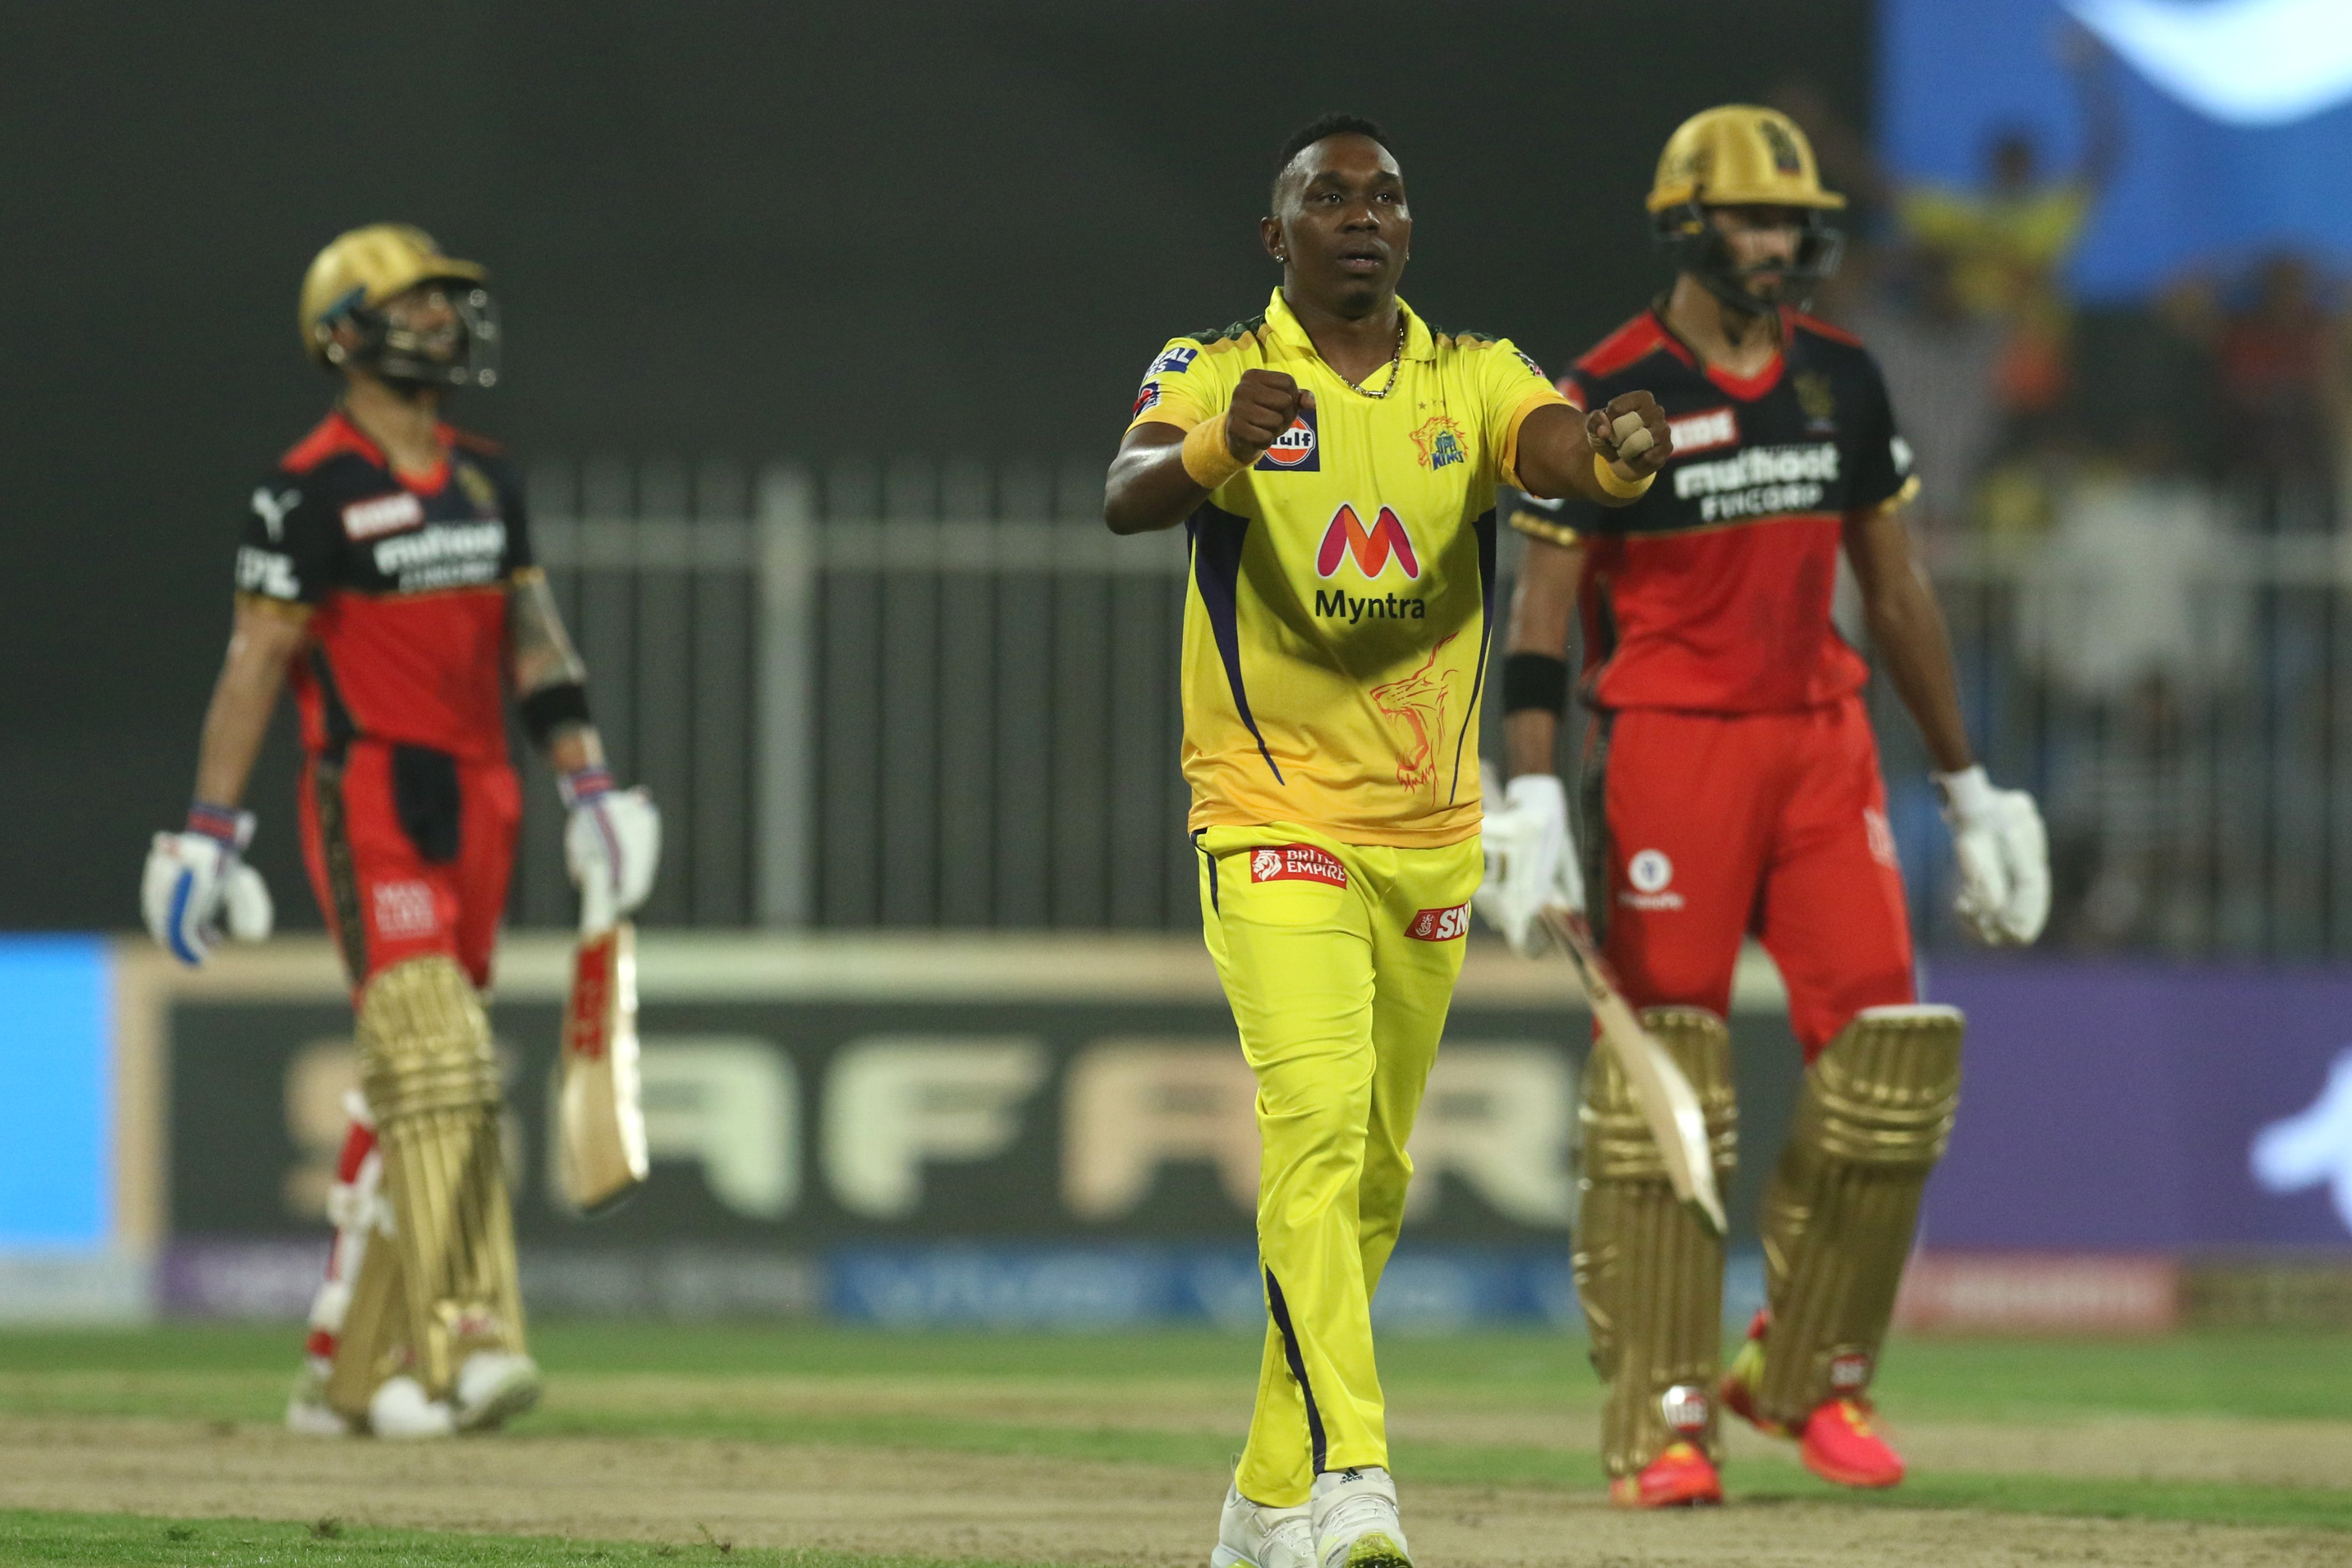 Dwayne Bravo starred with the ball for CSK | BCCI/IPL